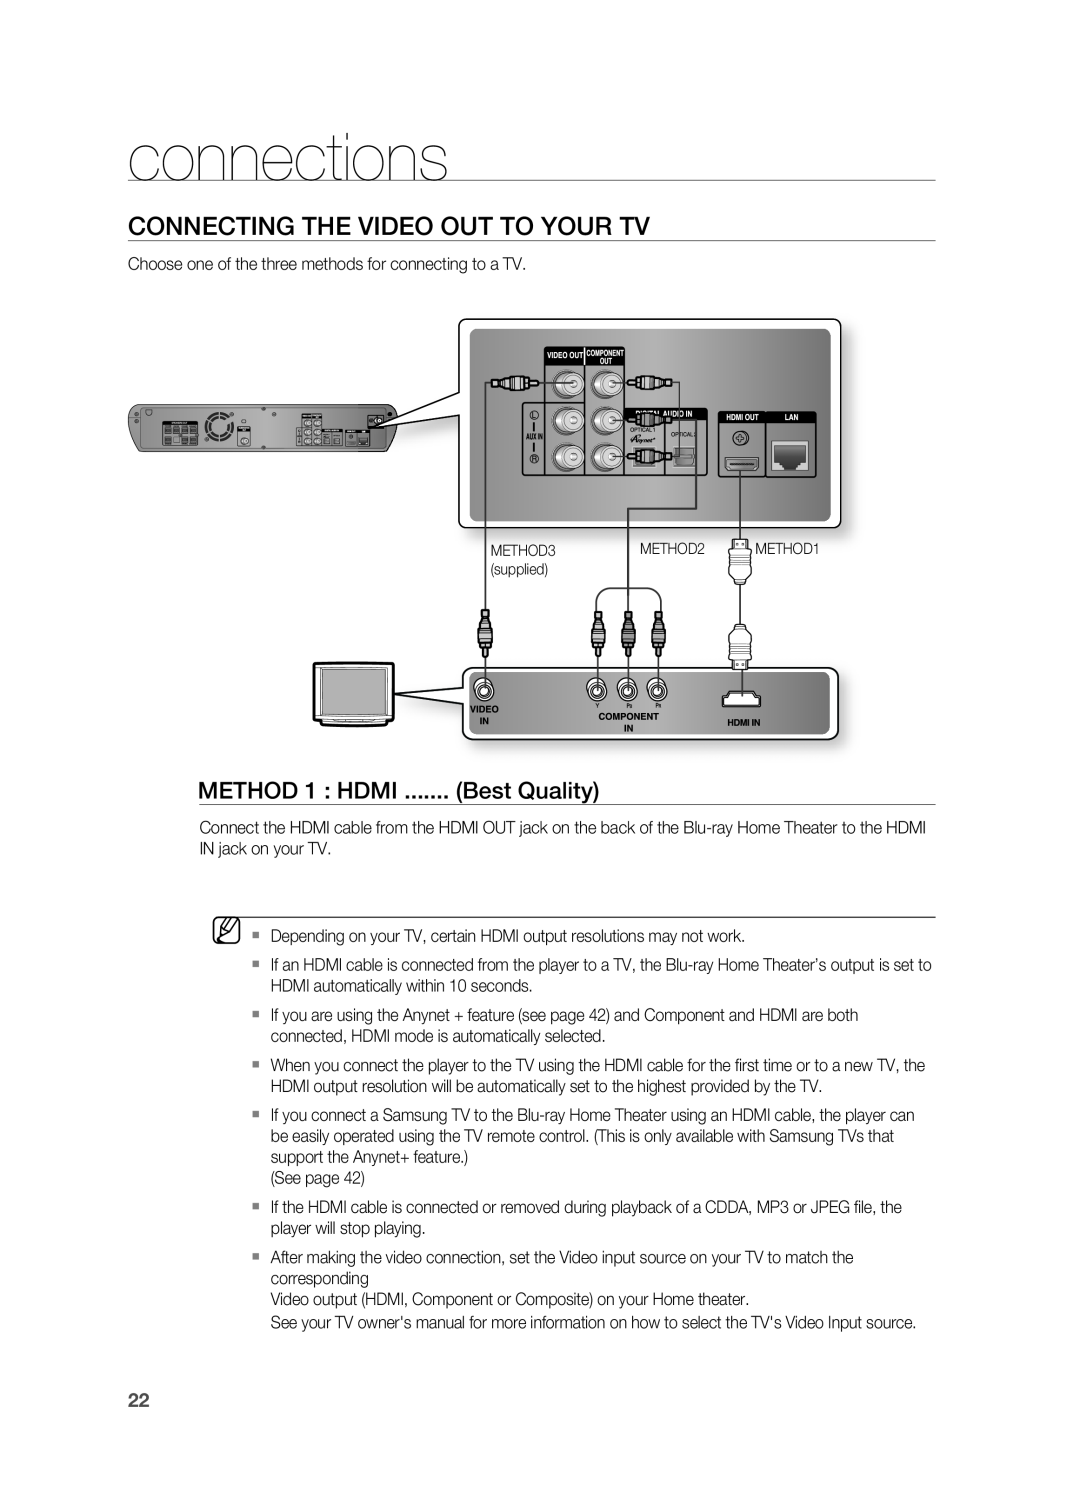 Samsung AH68-02019S manual Connecting the Video Out to your TV, METHOD 1 : HDMI, Best Quality, connections 